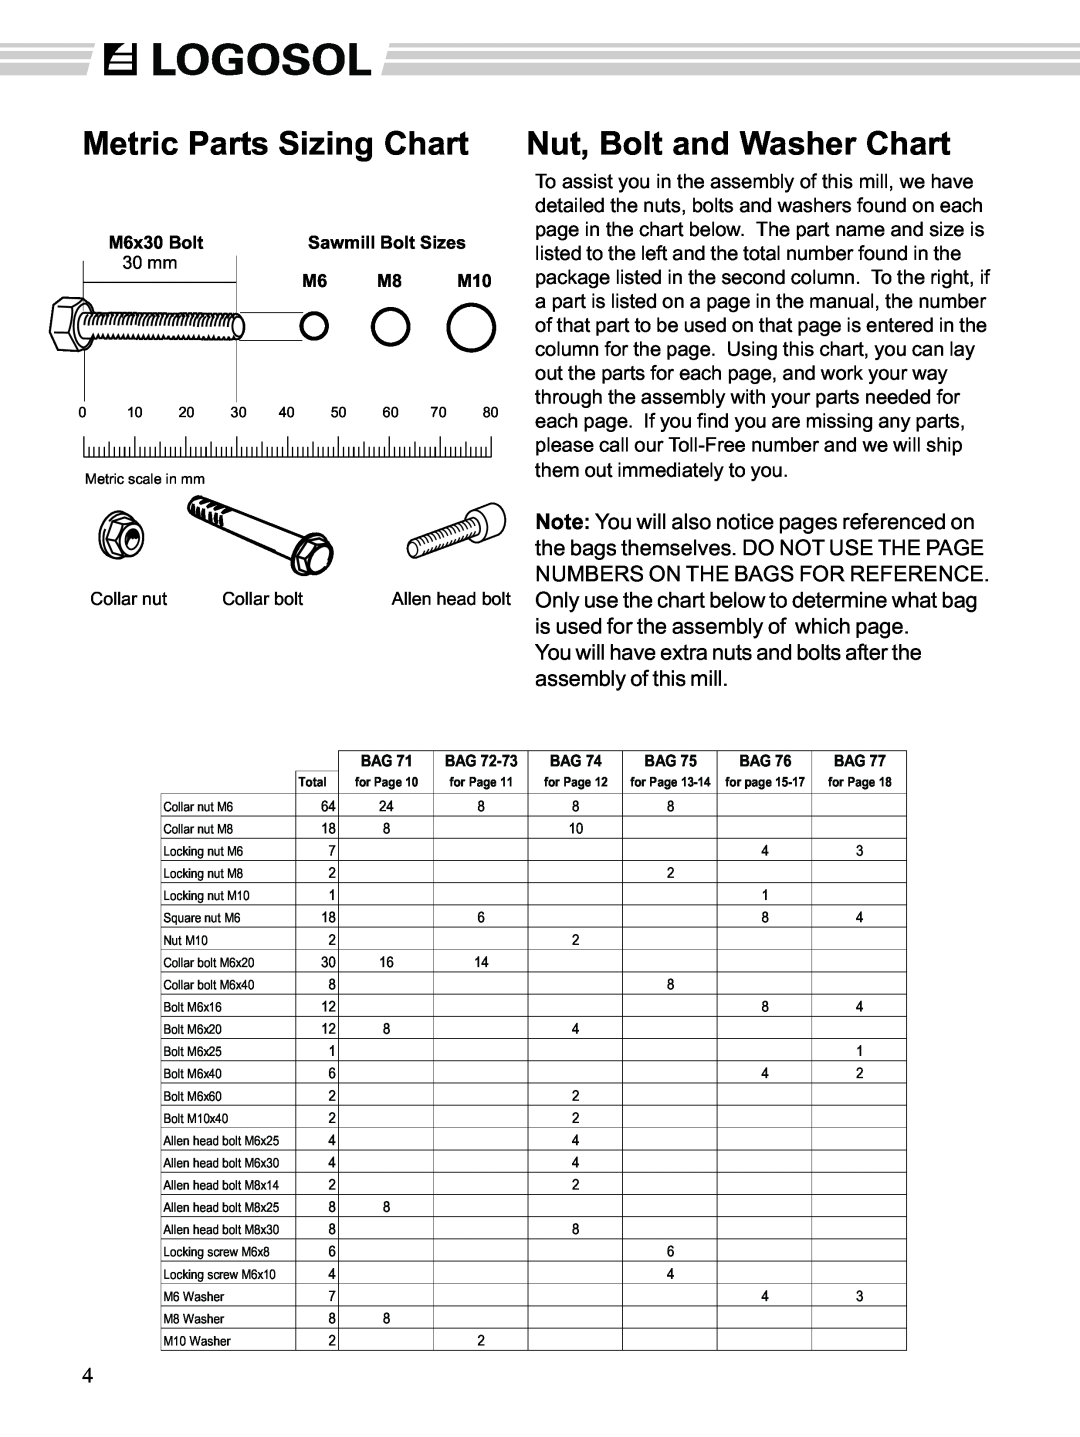 Husqvarna M7 manual Metric Parts Sizing Chart, Nut, Bolt and Washer Chart, Note You will also notice pages referenced on 